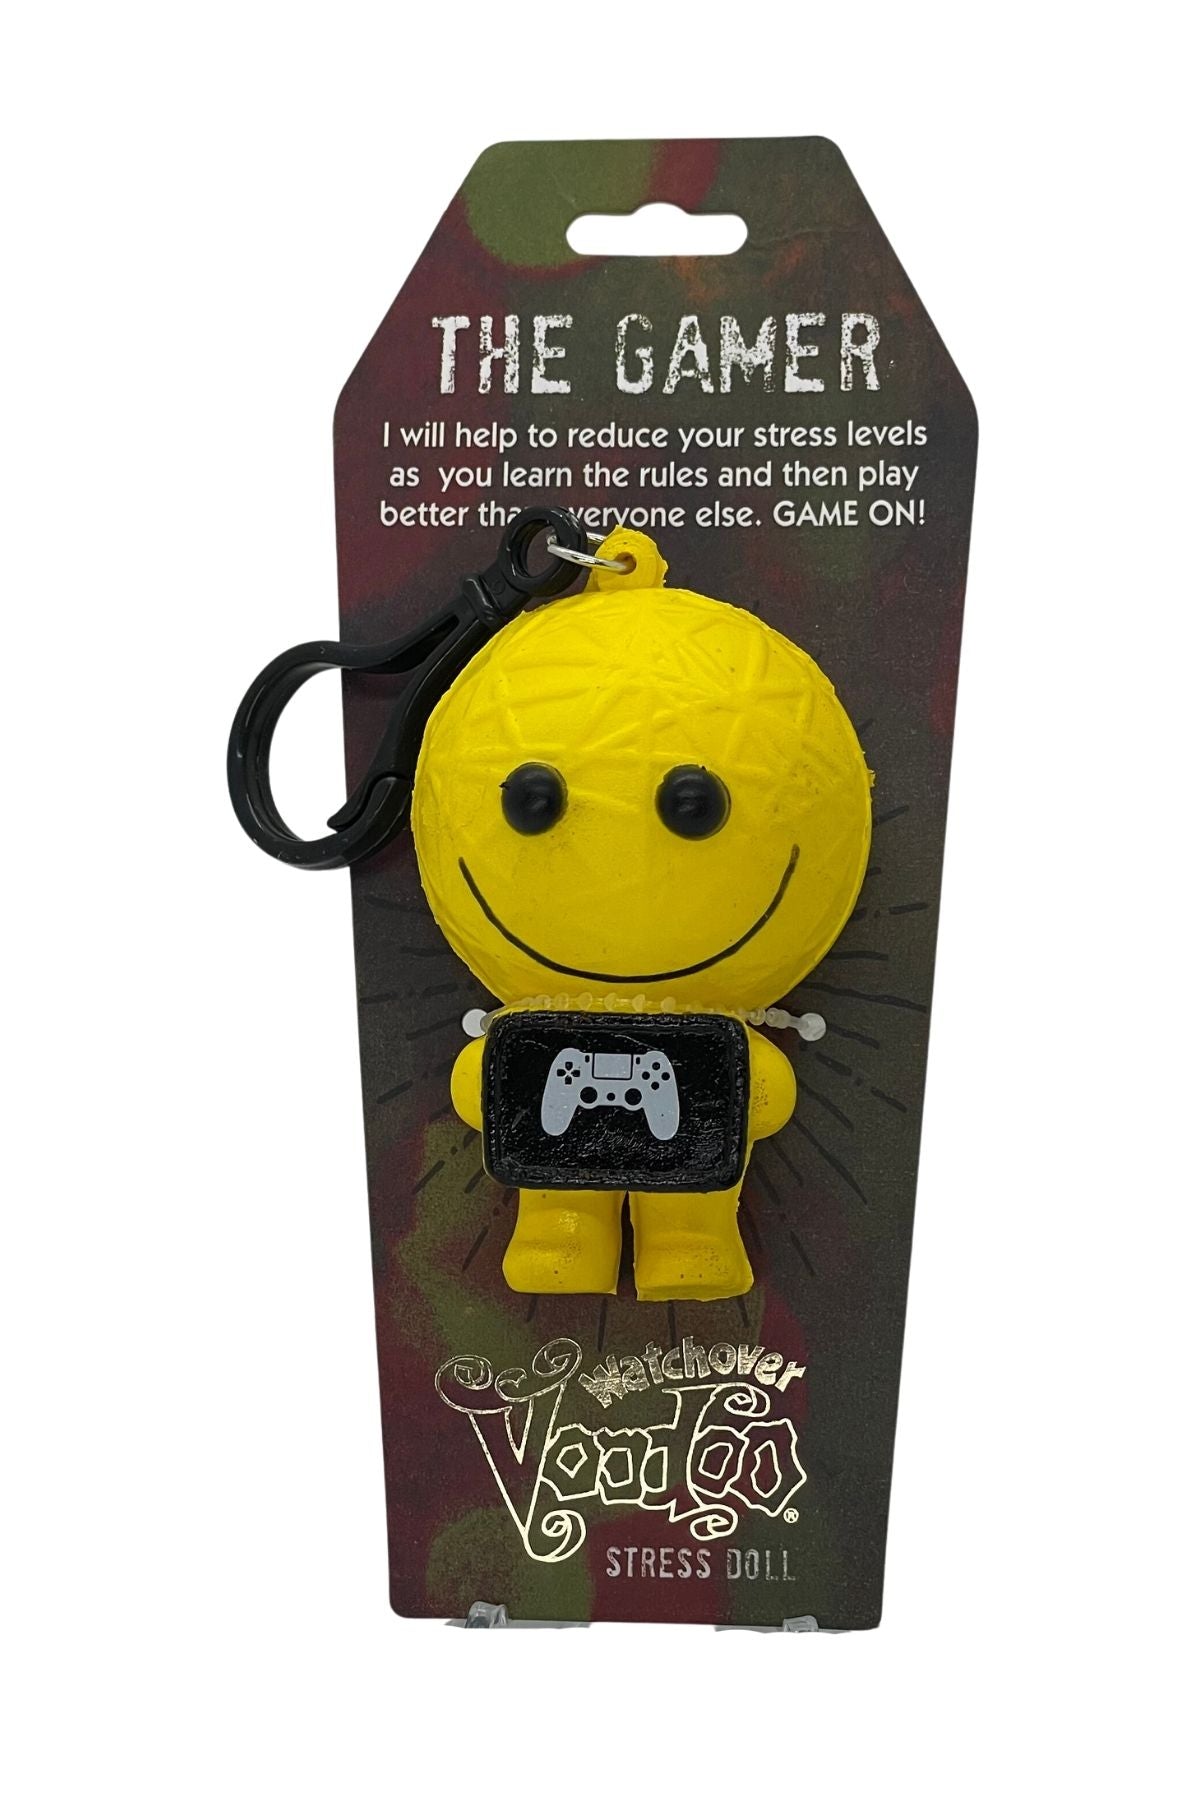 Voodoo Stress Doll -  The Gamer